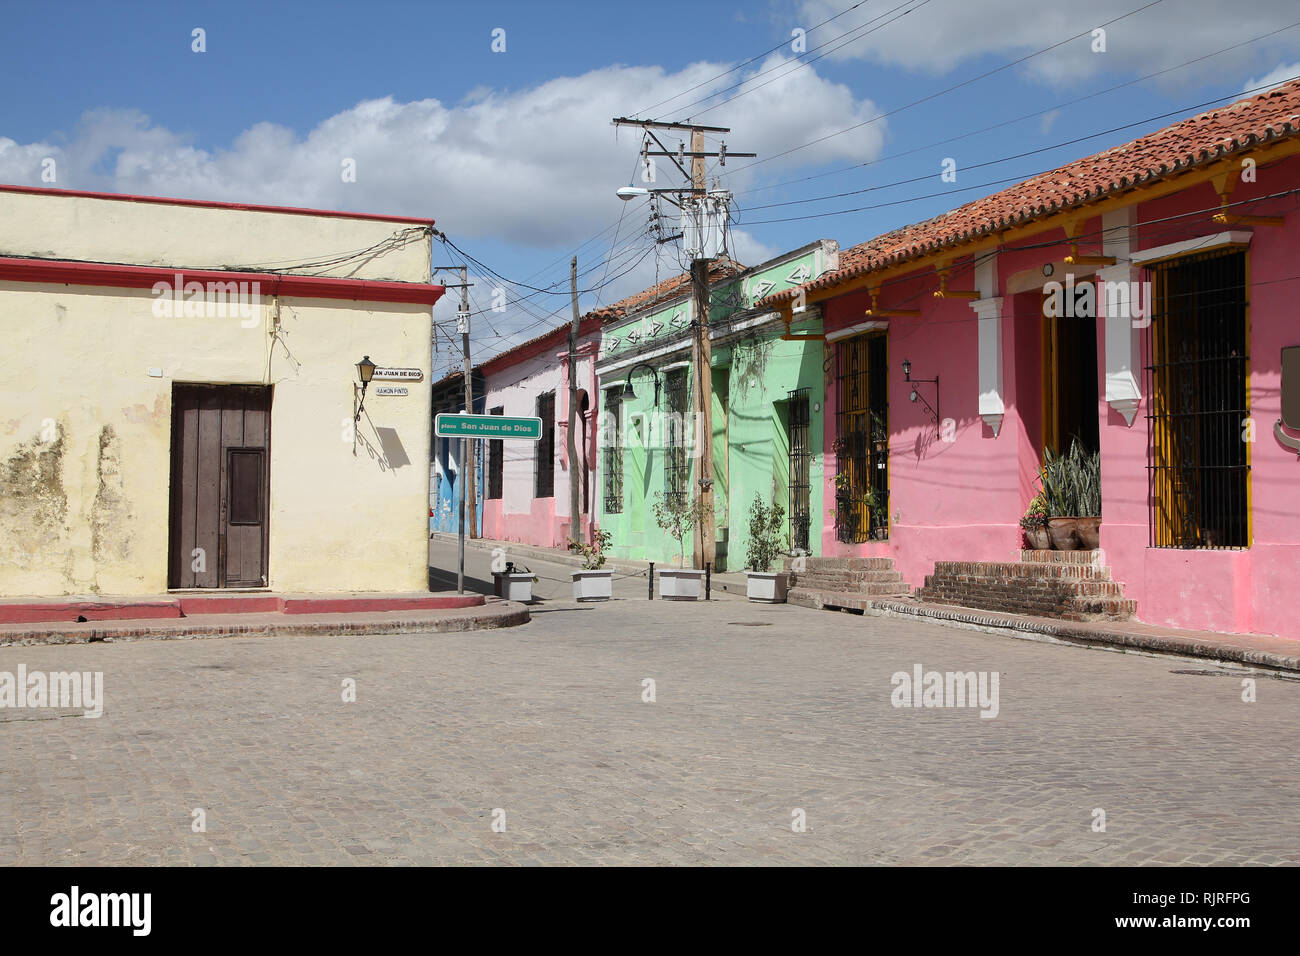 Camaguey, Cuba - old town listed on UNESCO World Heritage List Stock Photo